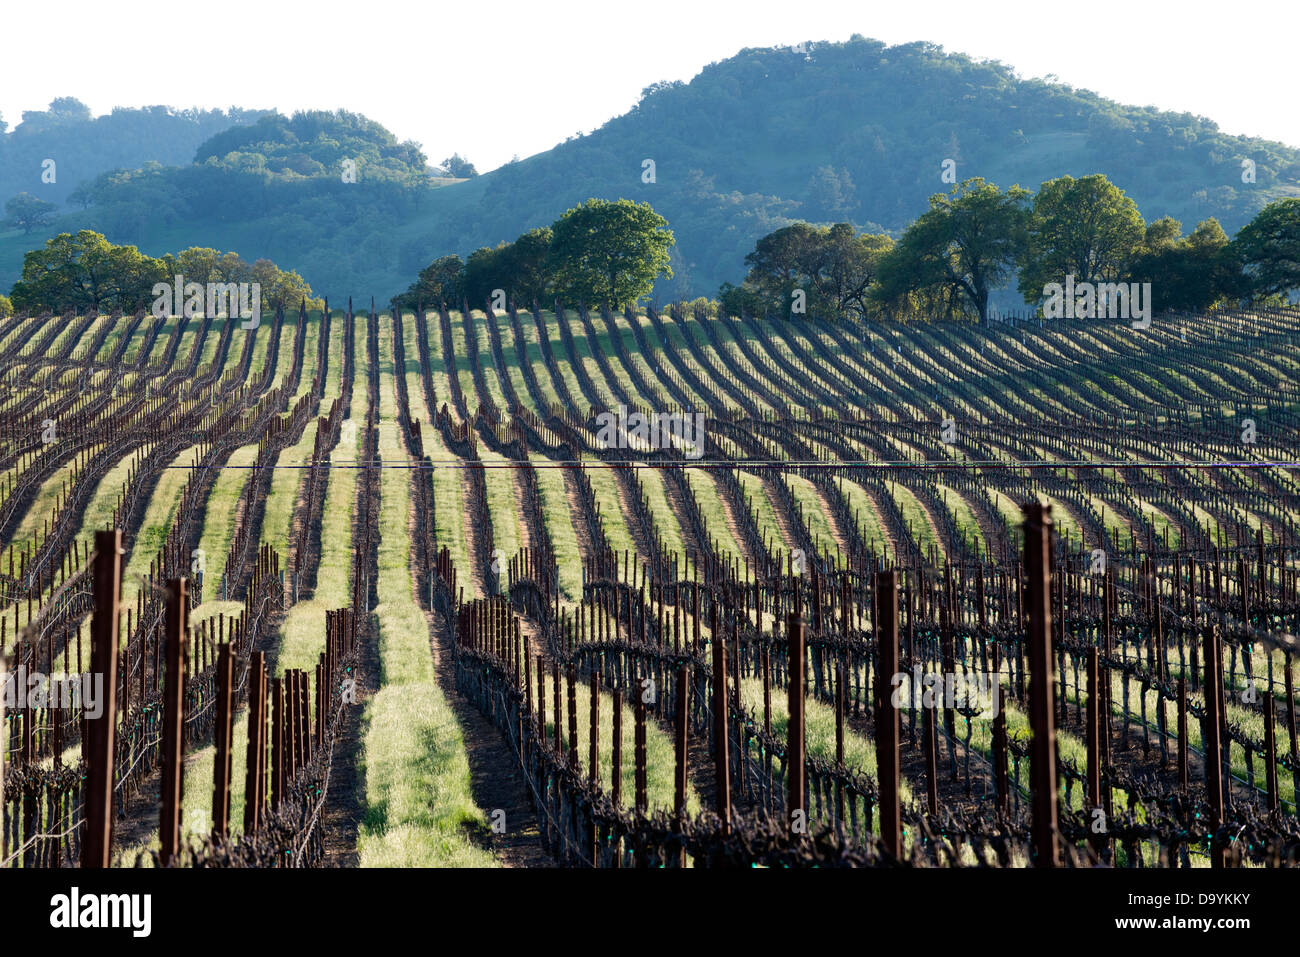 Looking out over a vineyard planted on rolling hills in the Alexander Valley appellation of the Sonoma Wine Country in the Sprin Stock Photo